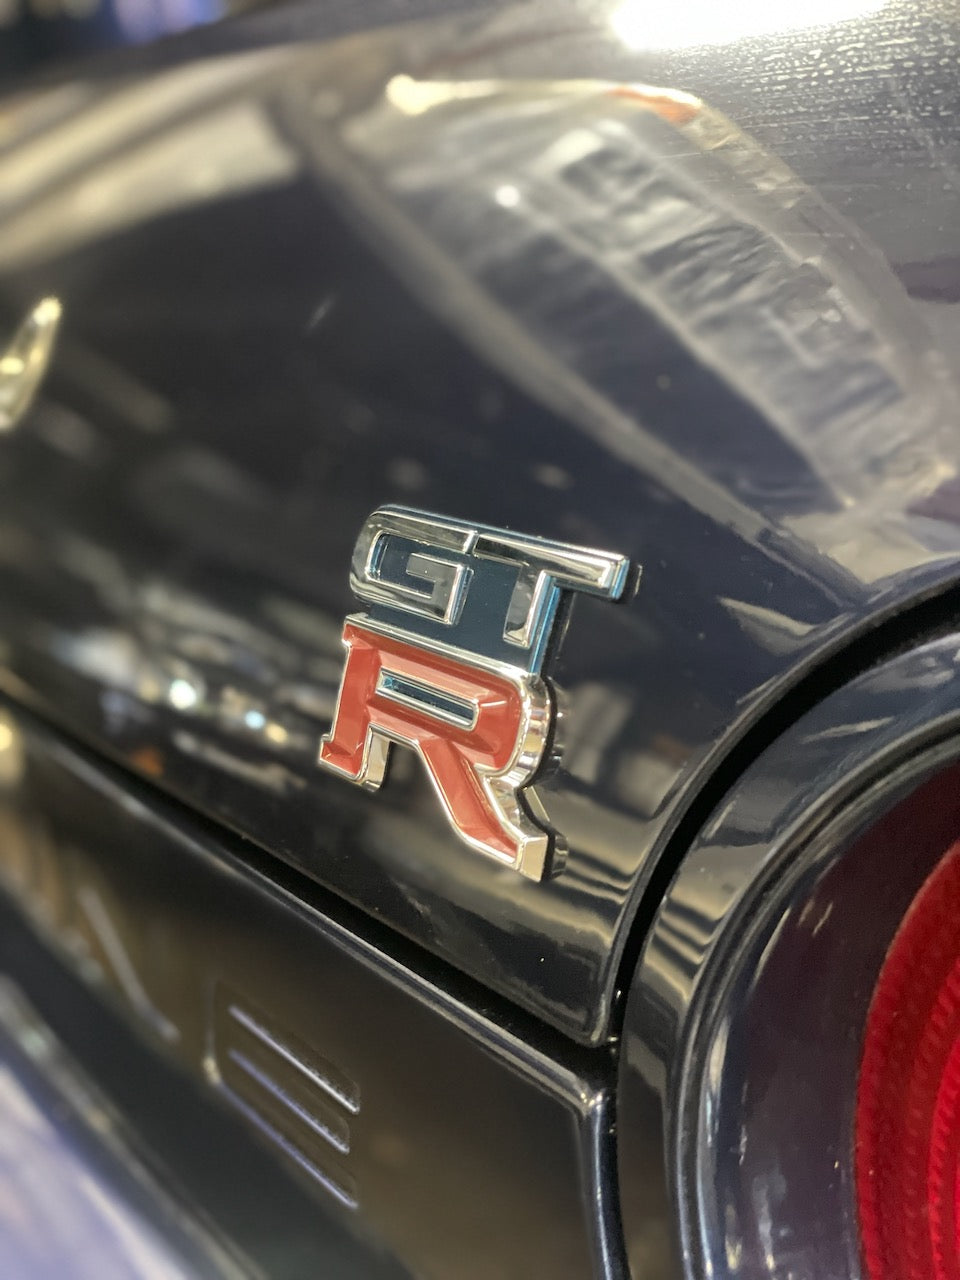 10 Essential Facts About the Iconic Nissan Skyline and Skyline GT-R